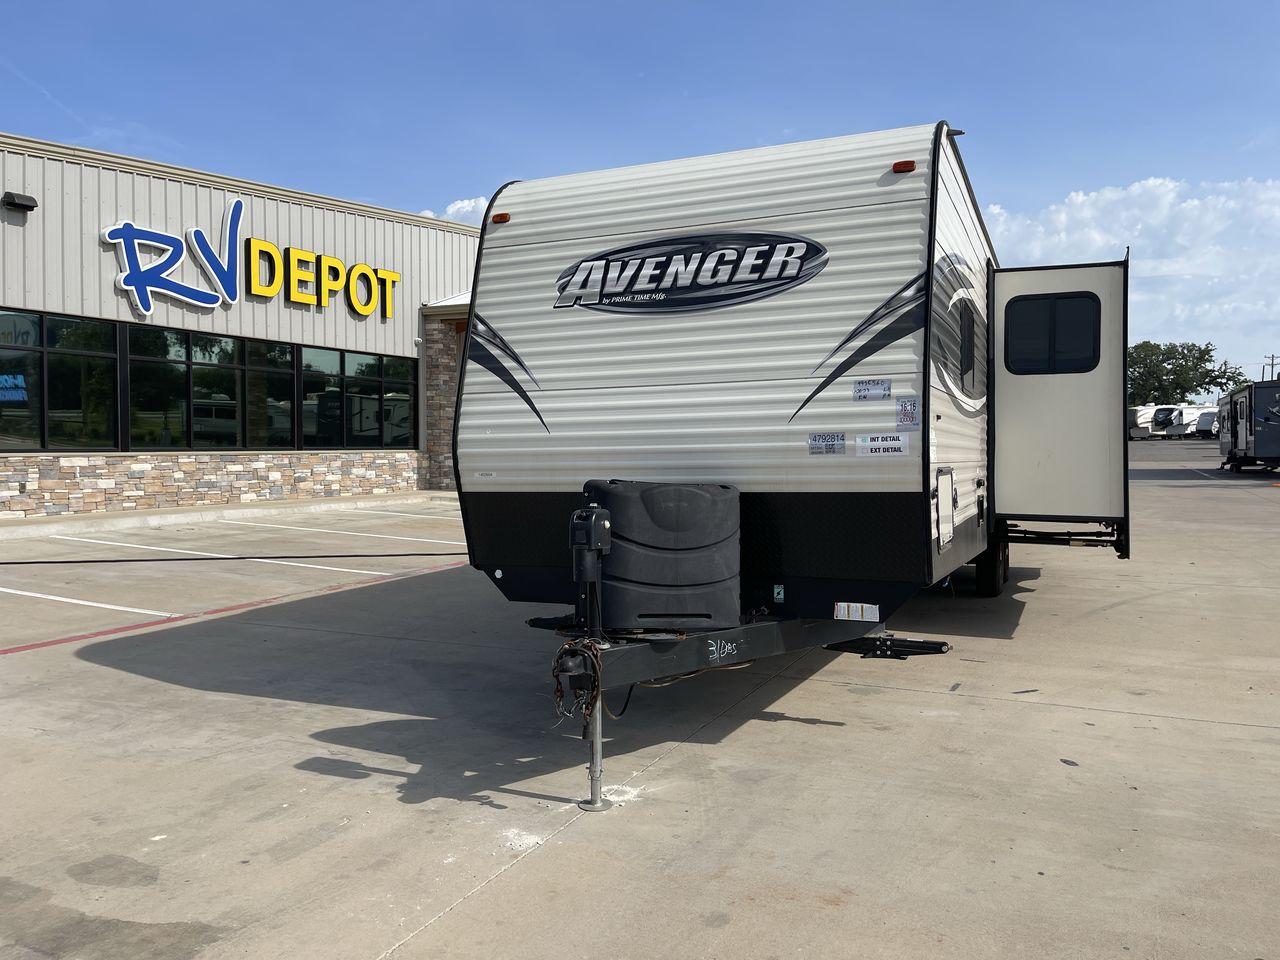 2018 FOREST RIVER AVENGER 31DBS (5ZT2AVWB4JB) , Length: 35.75 ft. | Dry Weight: 7,189 lbs. | Slides: 1 transmission, located at 4319 N Main St, Cleburne, TX, 76033, (817) 678-5133, 32.385960, -97.391212 - Looking for a perfect travel trailer for your next adventure? Look no further than this 2018 Forest River Avenger 31DBS, available for sale at RV Depot in Cleburne, TX. With its spacious interior, comfortable amenities, and durable construction, this travel trailer is ready to take you on unforgetta - Photo #0